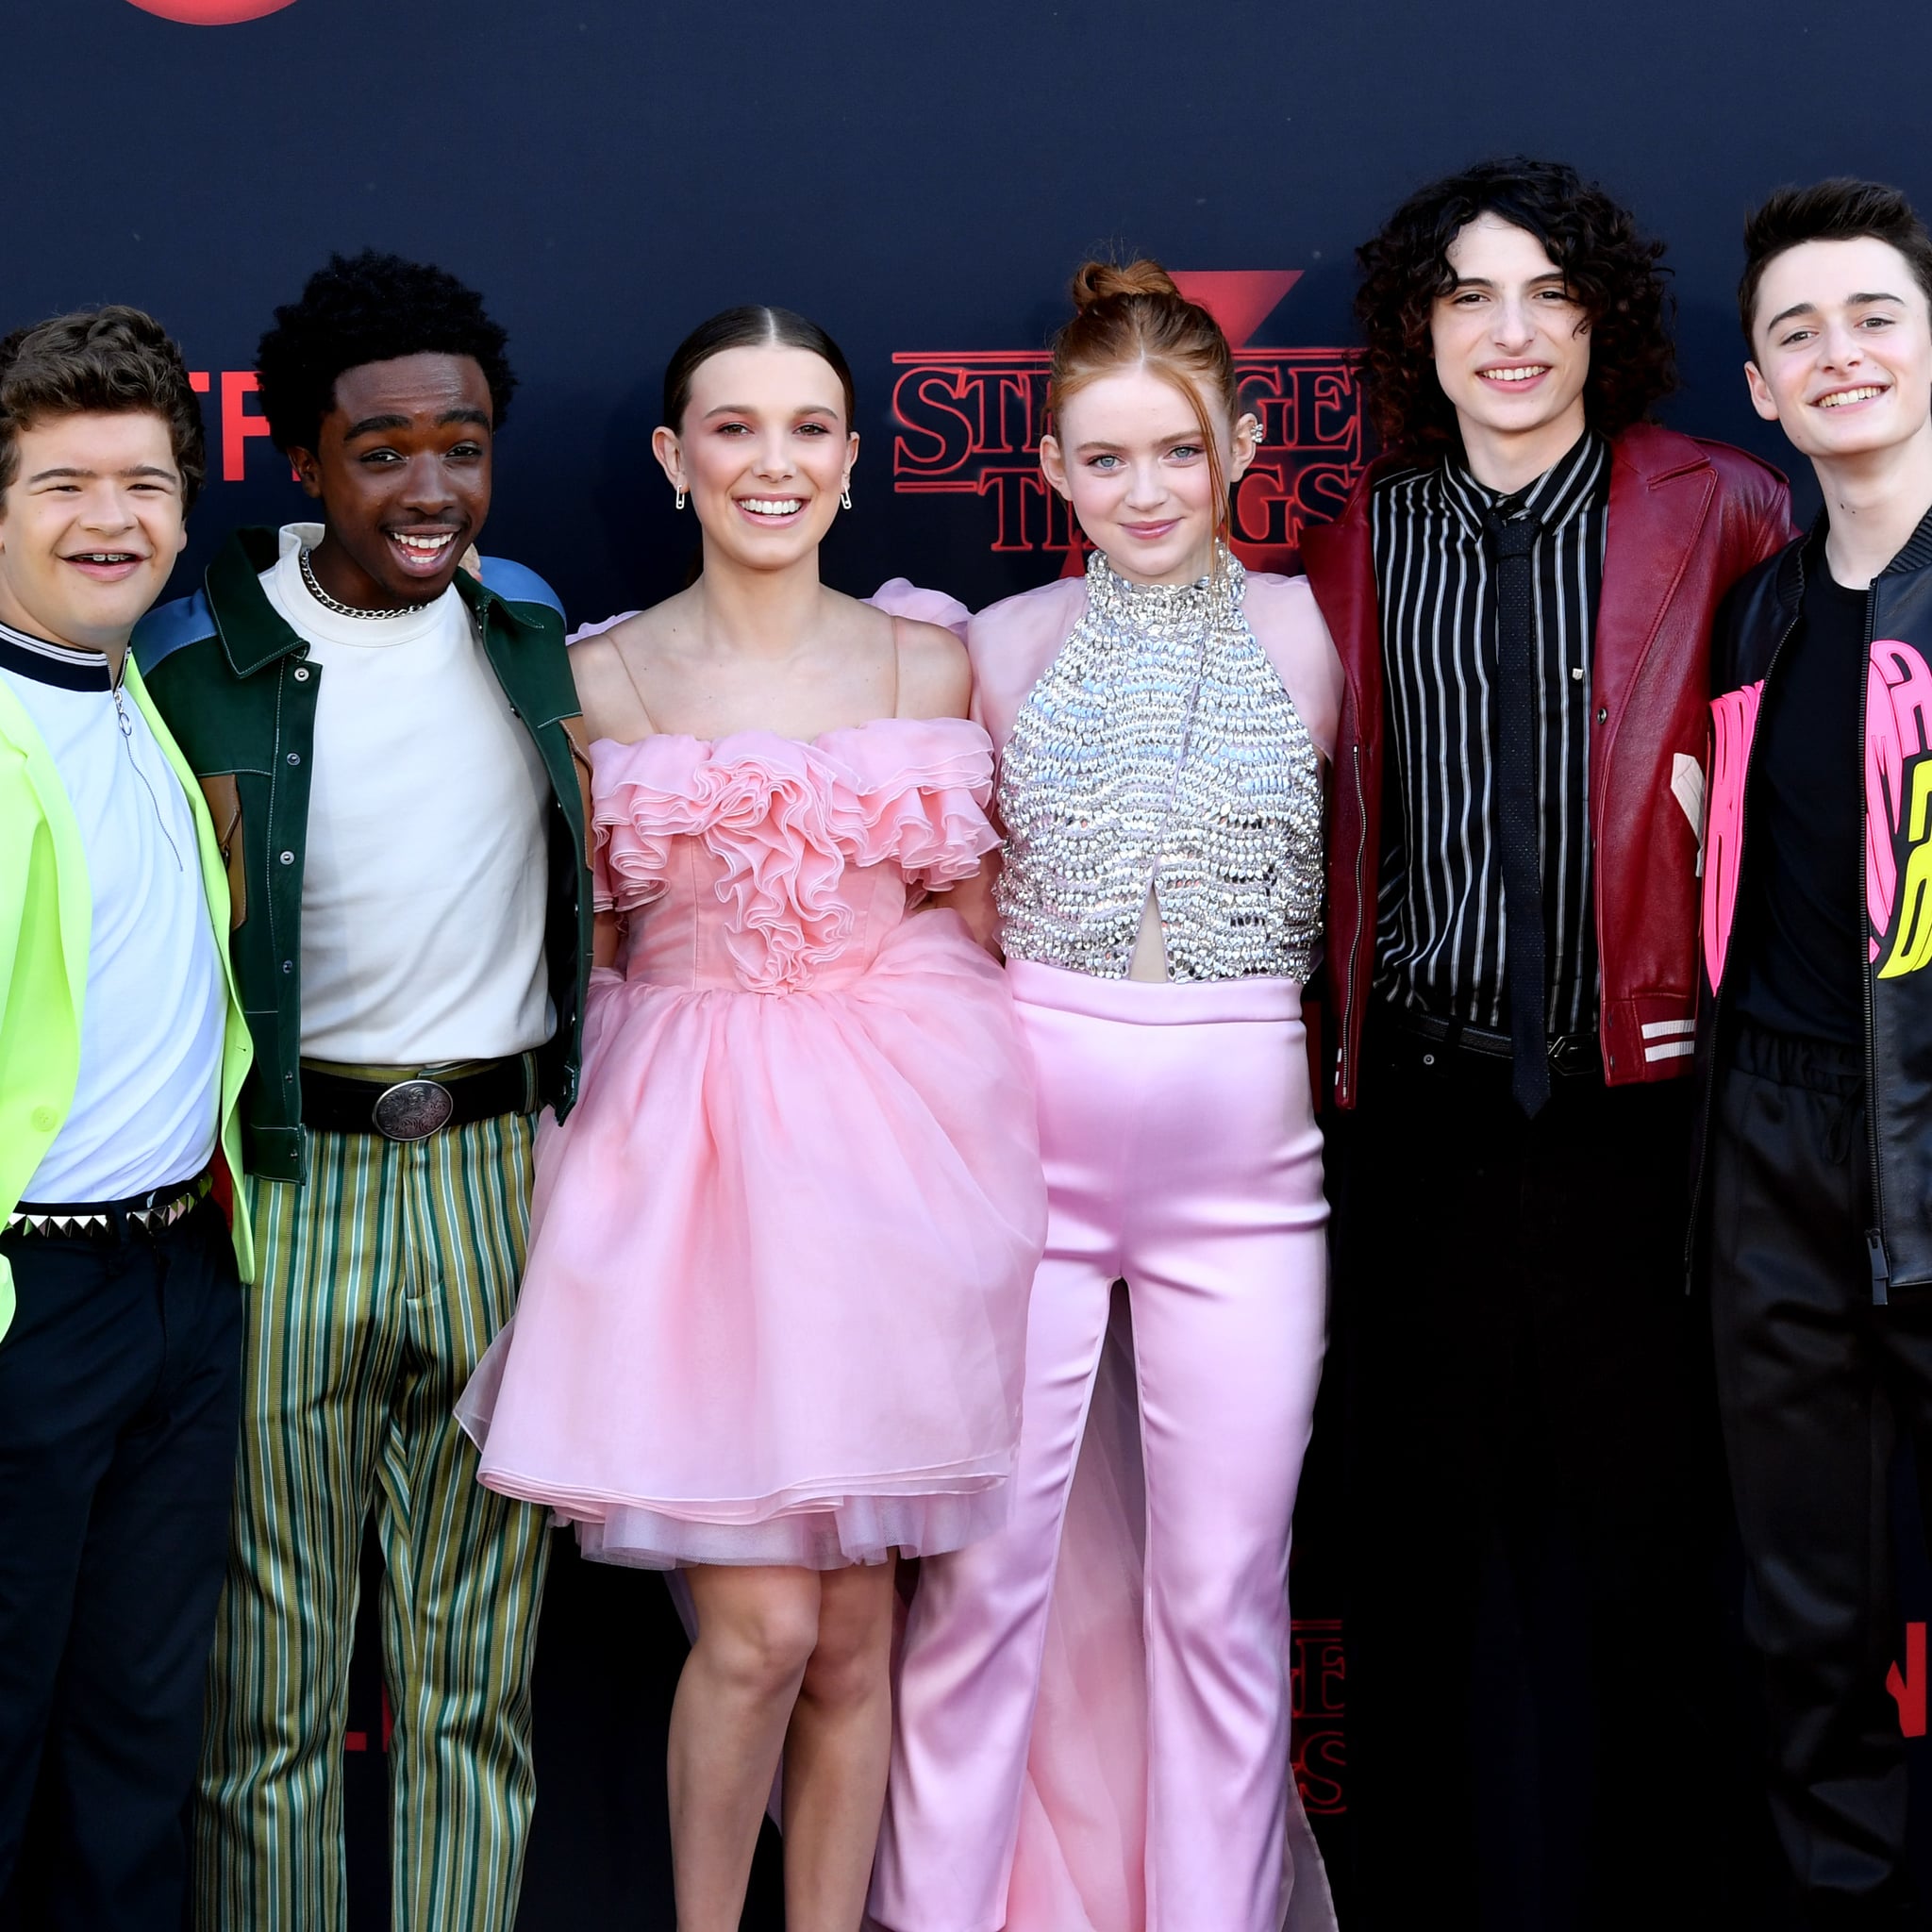 Where Can You See The Stranger Things Cast Next Popsugar Entertainment